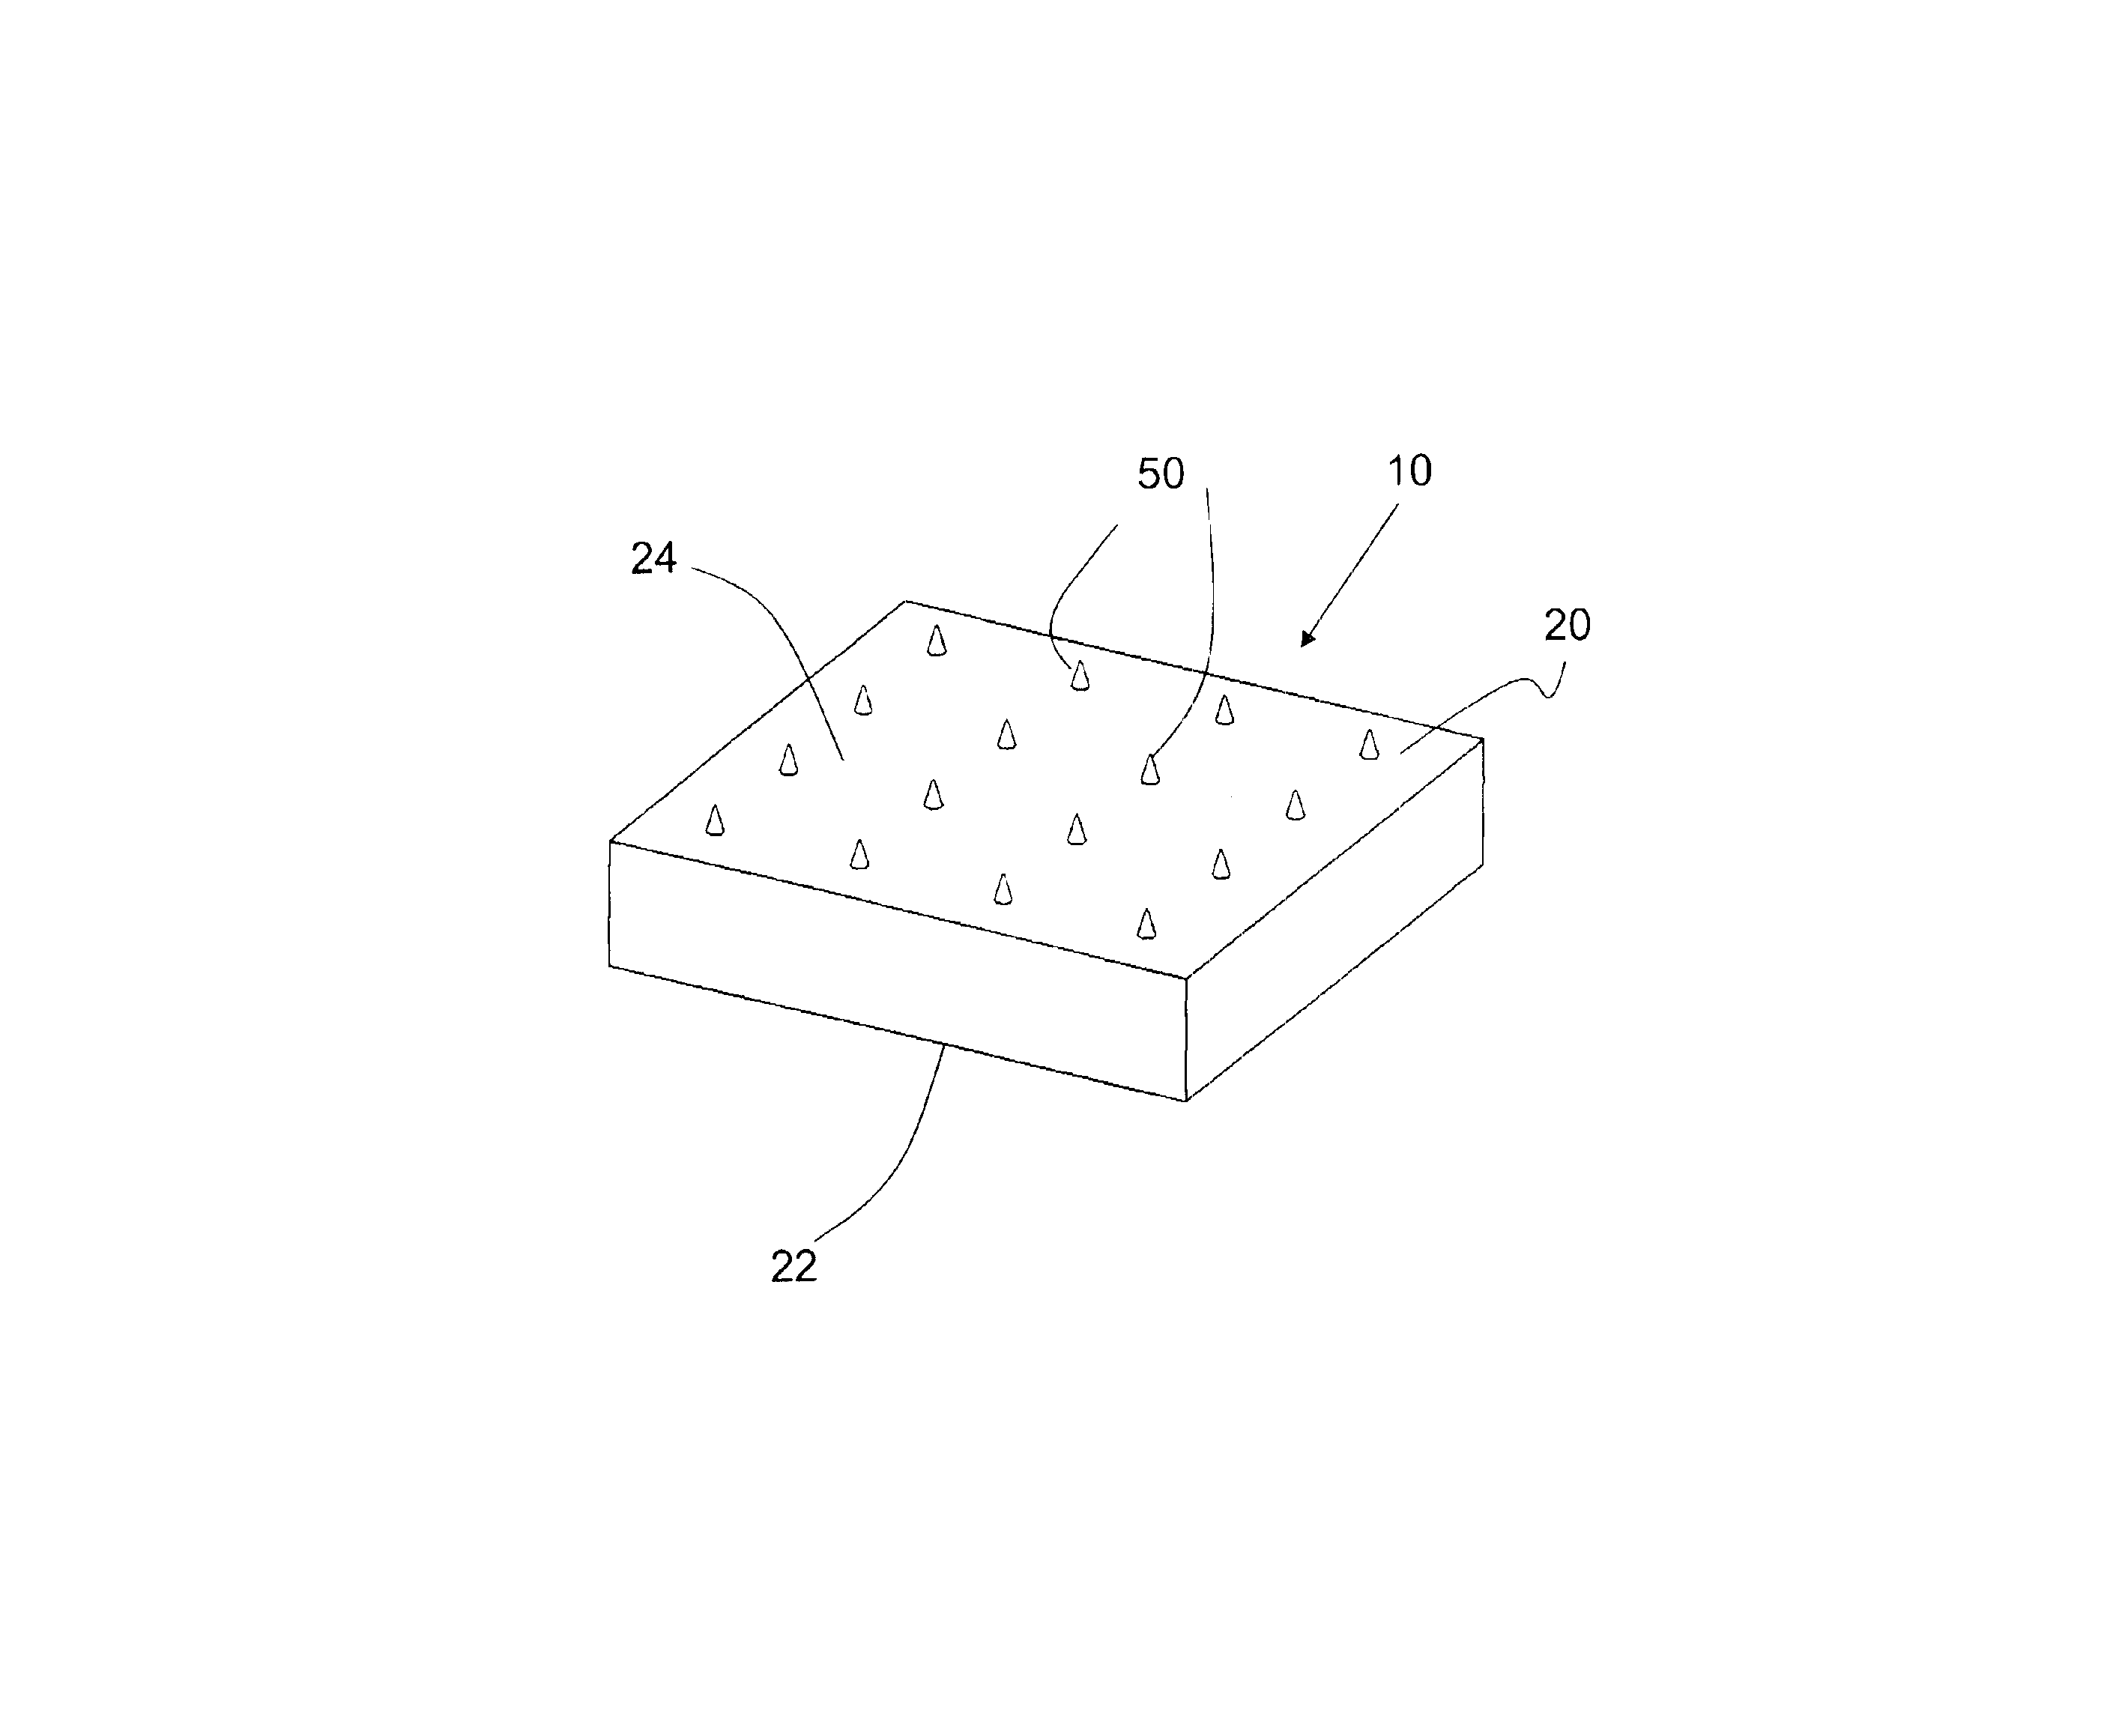 Interface members and holders for microfluidic array devices